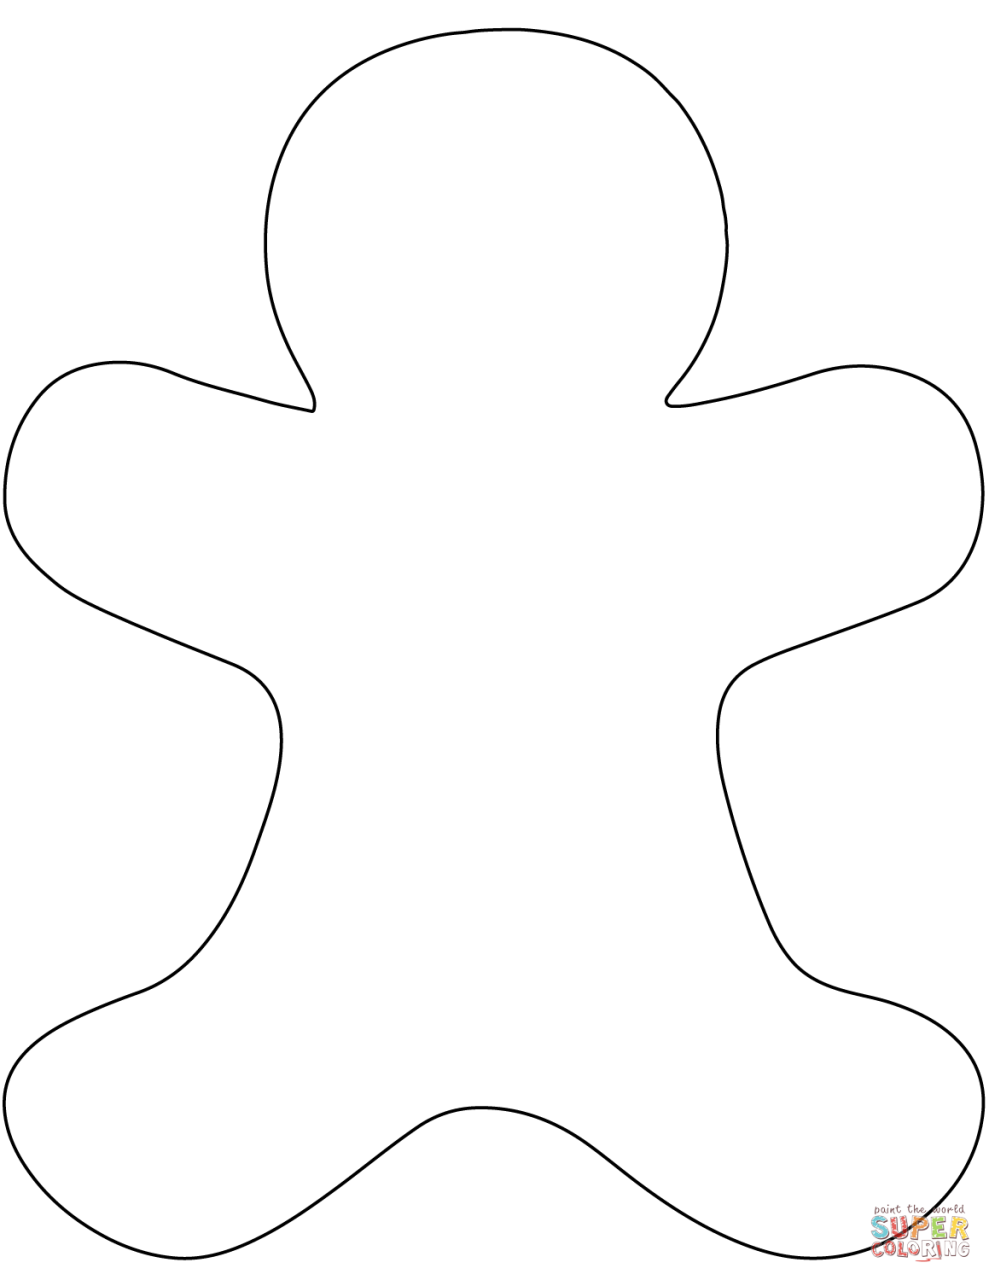 Blank Gingerbread Man coloring page Free Printable Coloring Pages